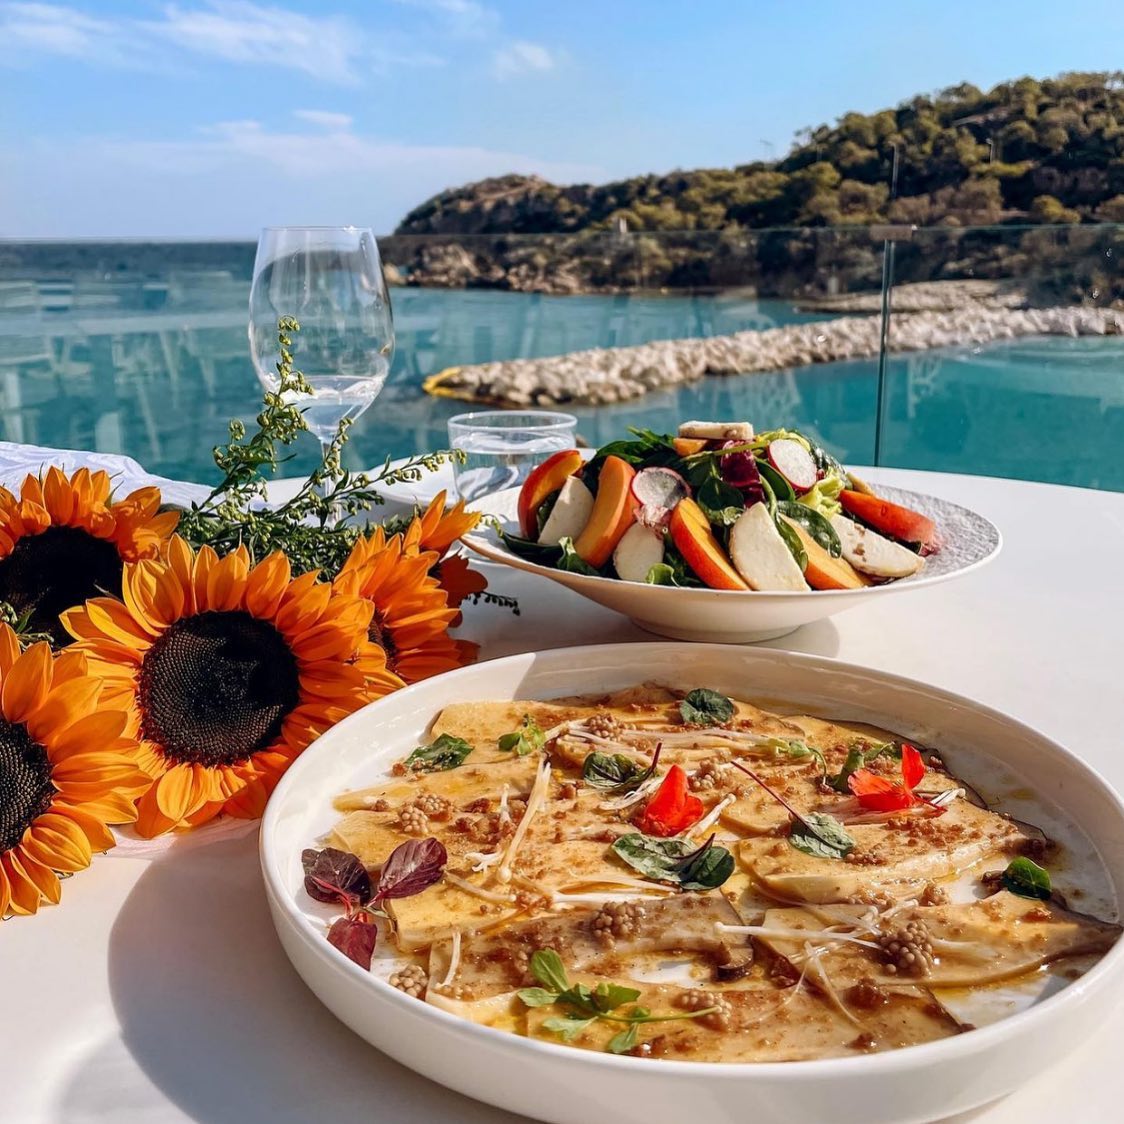 Incredible brunch at Ithaki - The proof that best things in life are meant to be shared